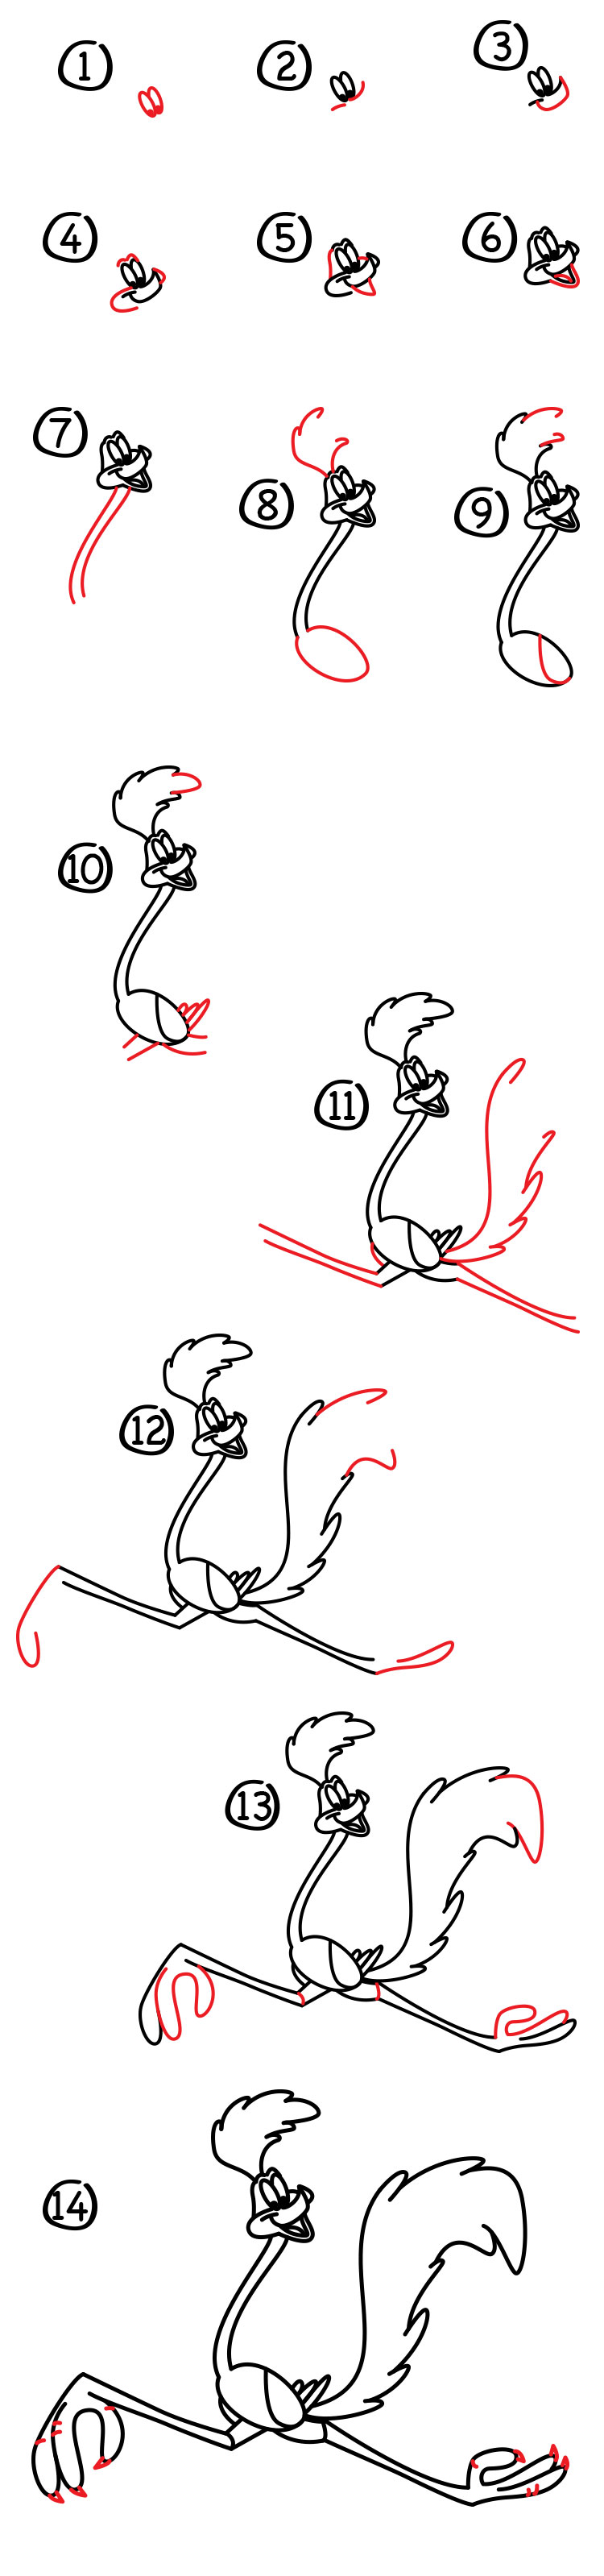 How To Draw The Road Runner